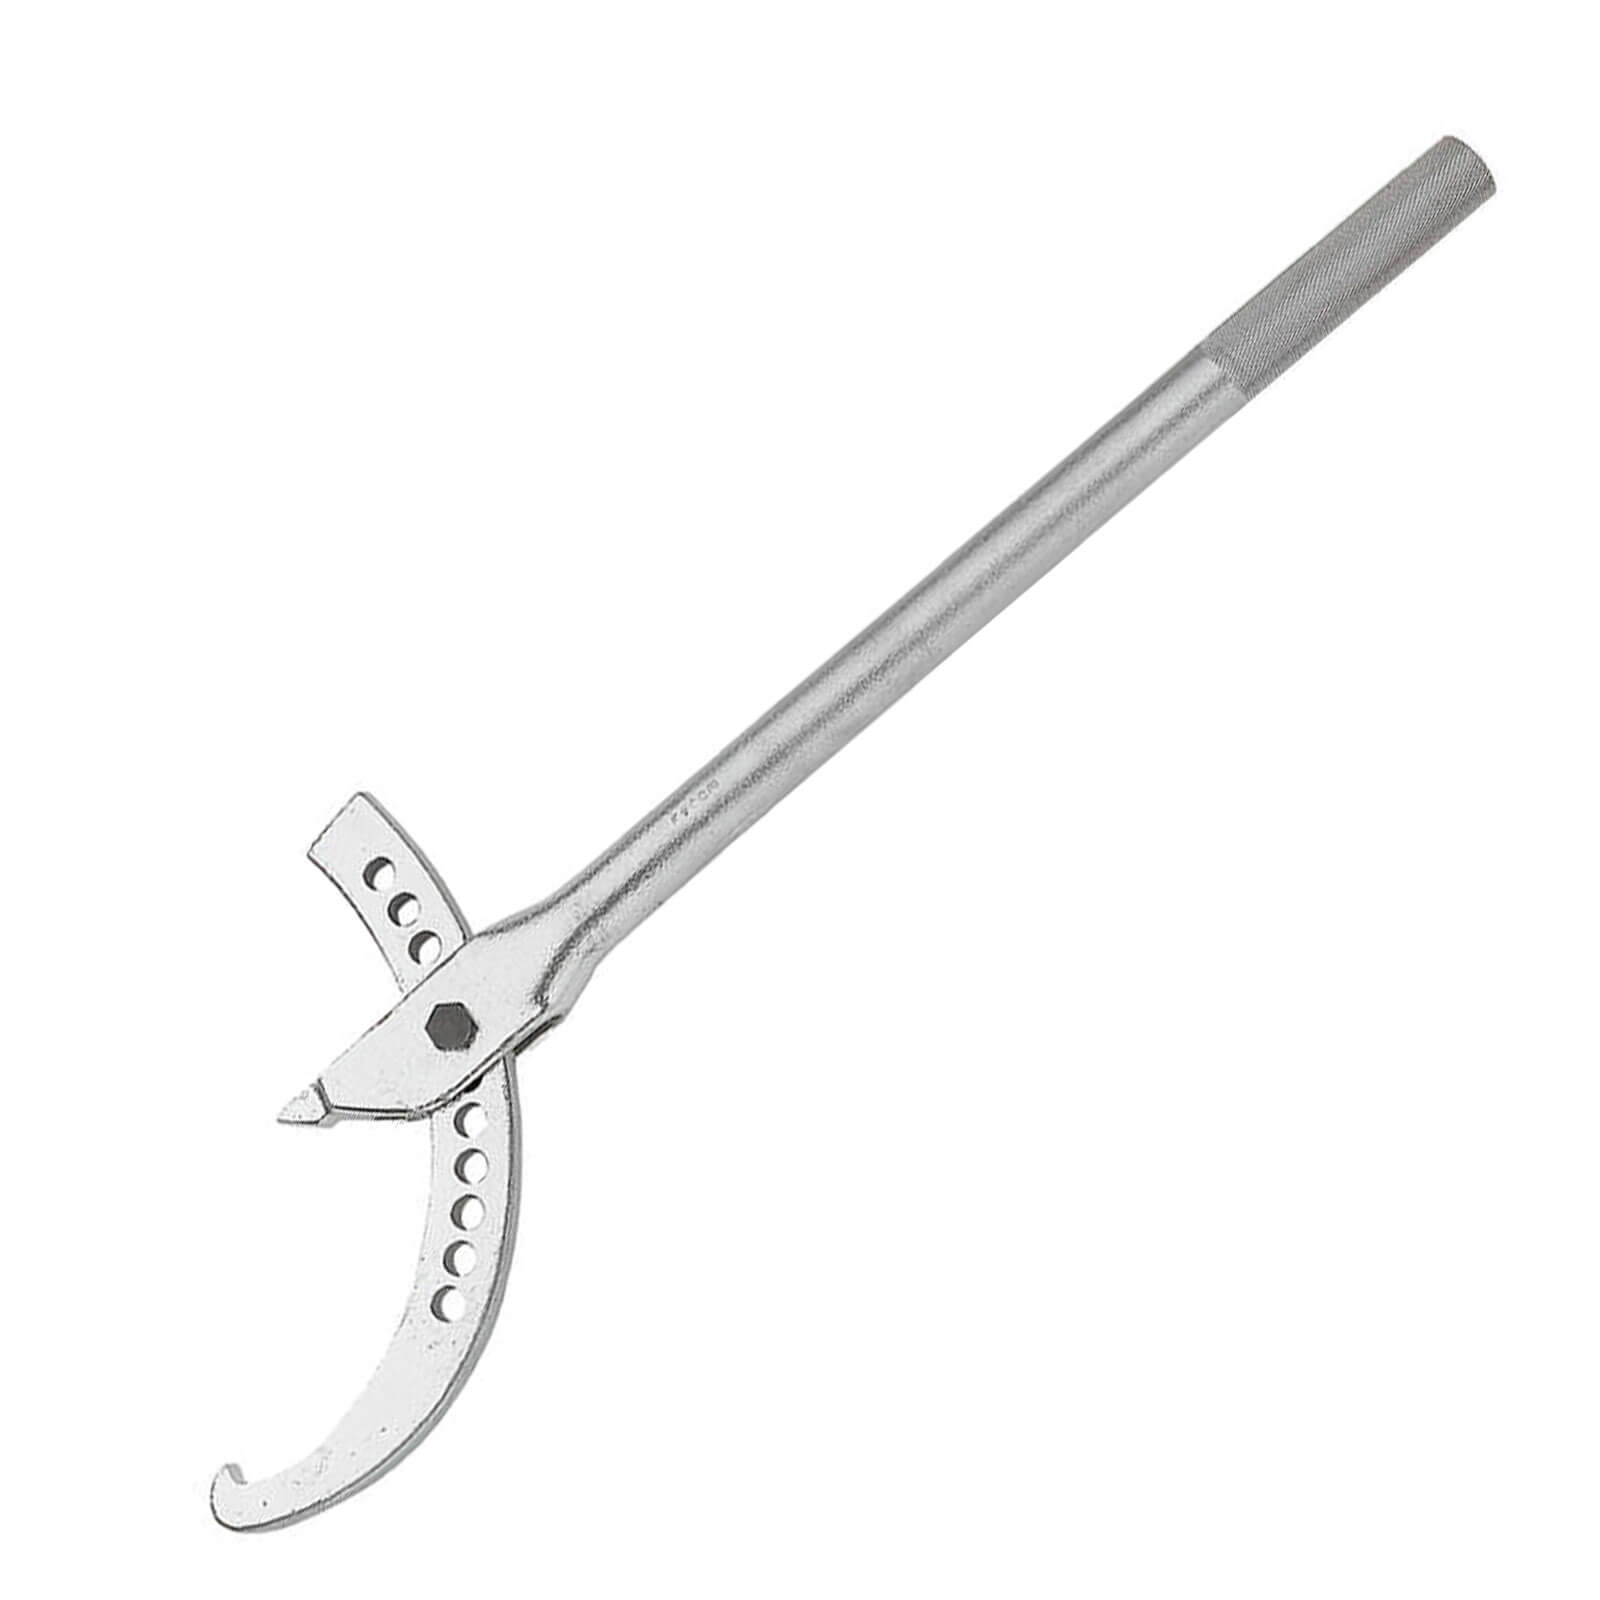 Facom Heavy Duty Hook and Pin Wrench 120mm - 224mm